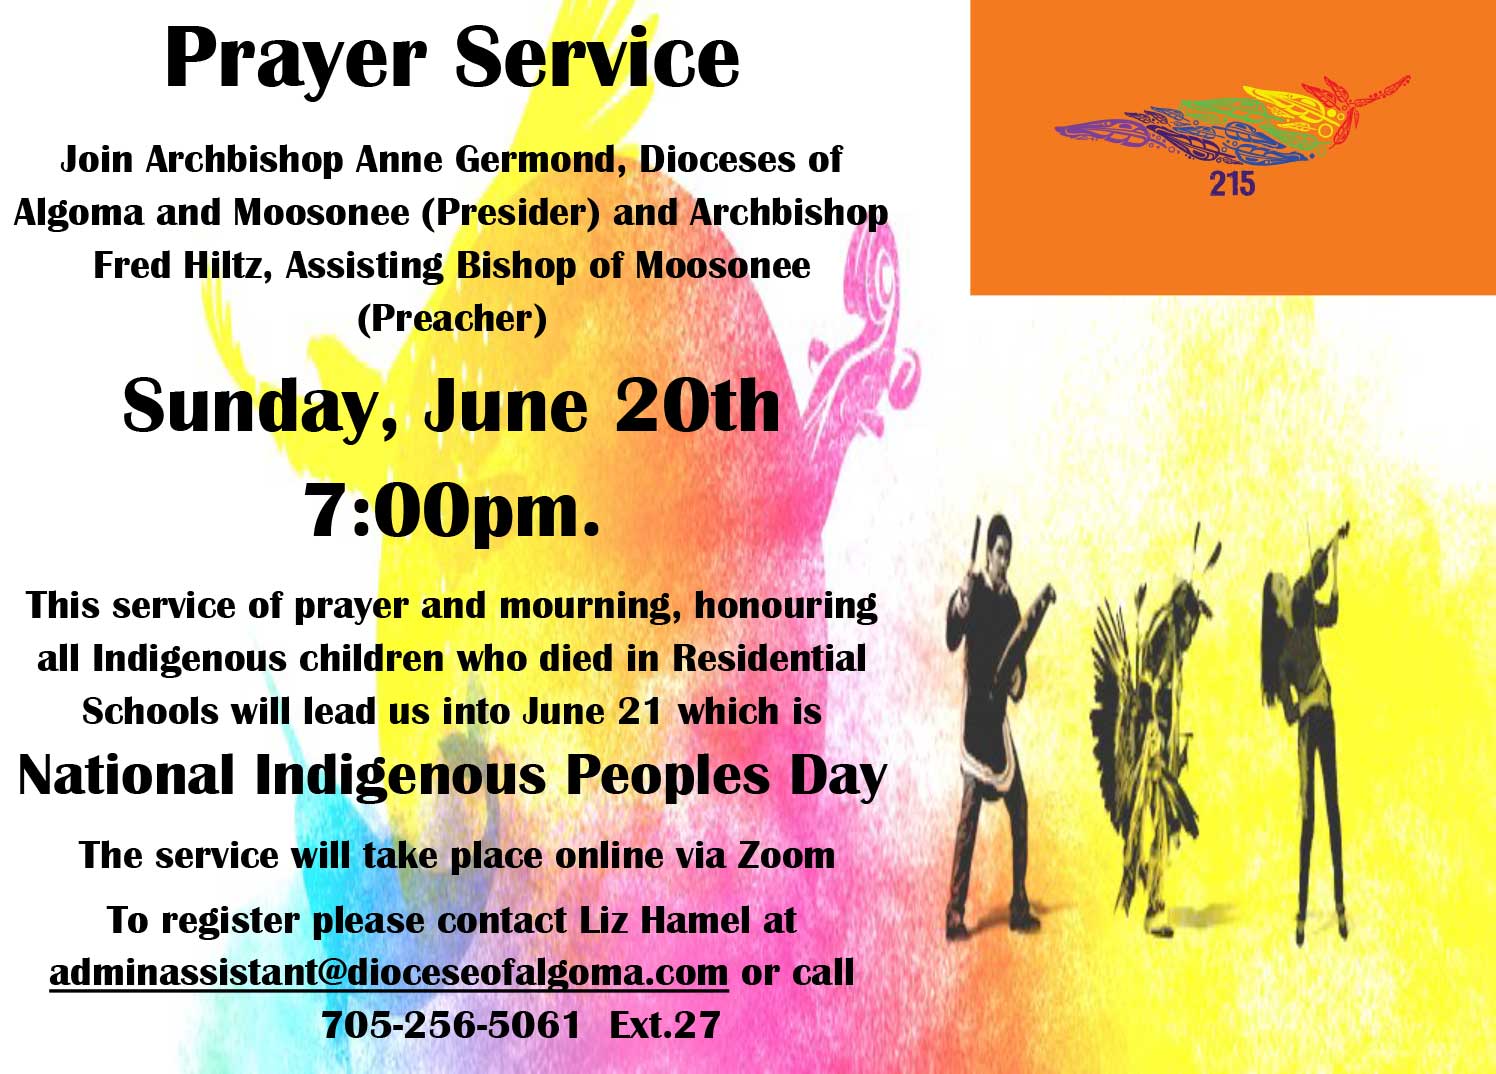 Prayer Service for National Indigenous Peoples Day Anglican Diocese of Moosonee